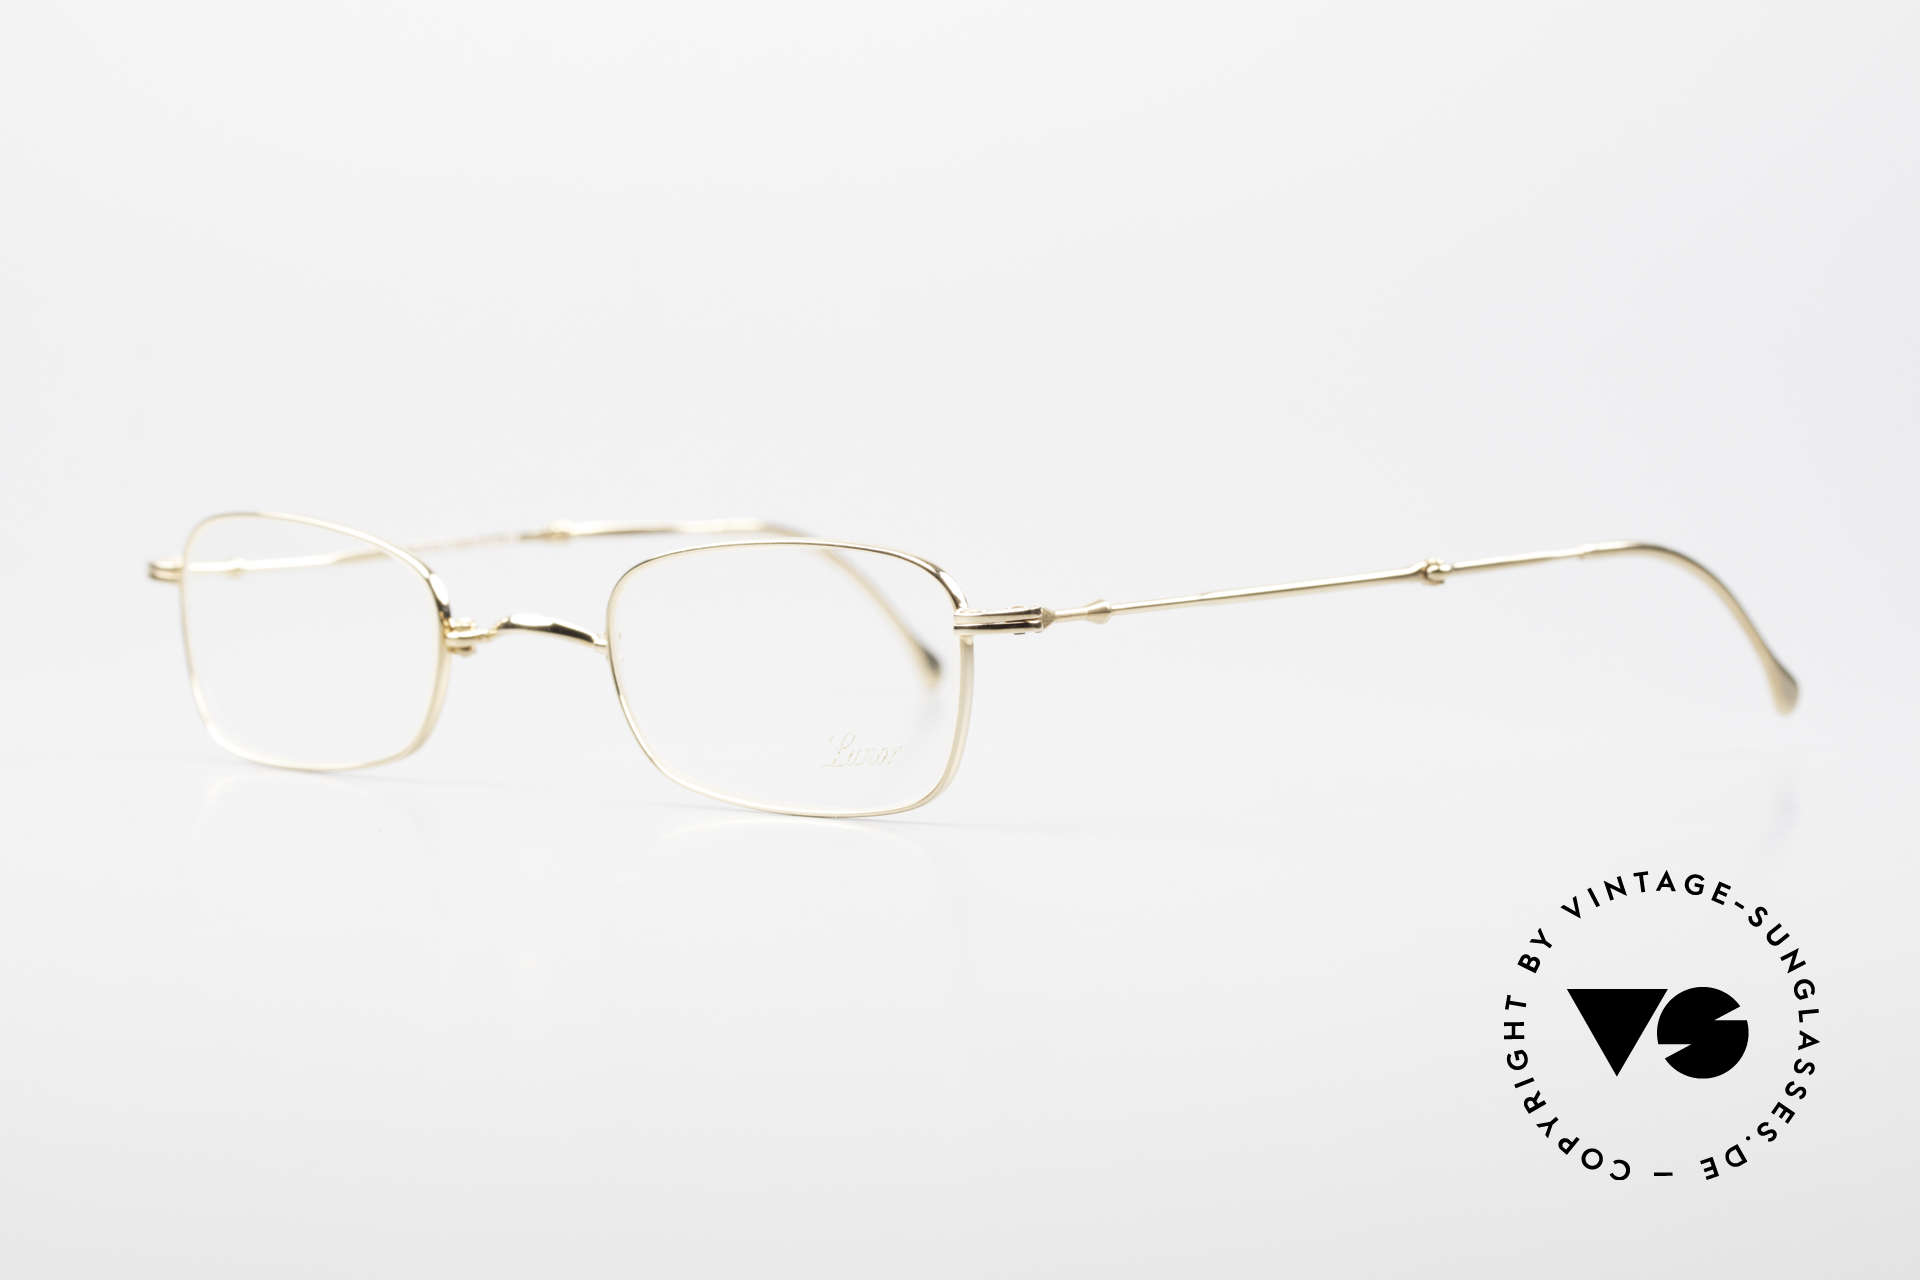 Lunor XXV Folding 02 Foldable Frame Gold Plated, well-known for the "W-bridge" & the plain frame designs, Made for Men and Women